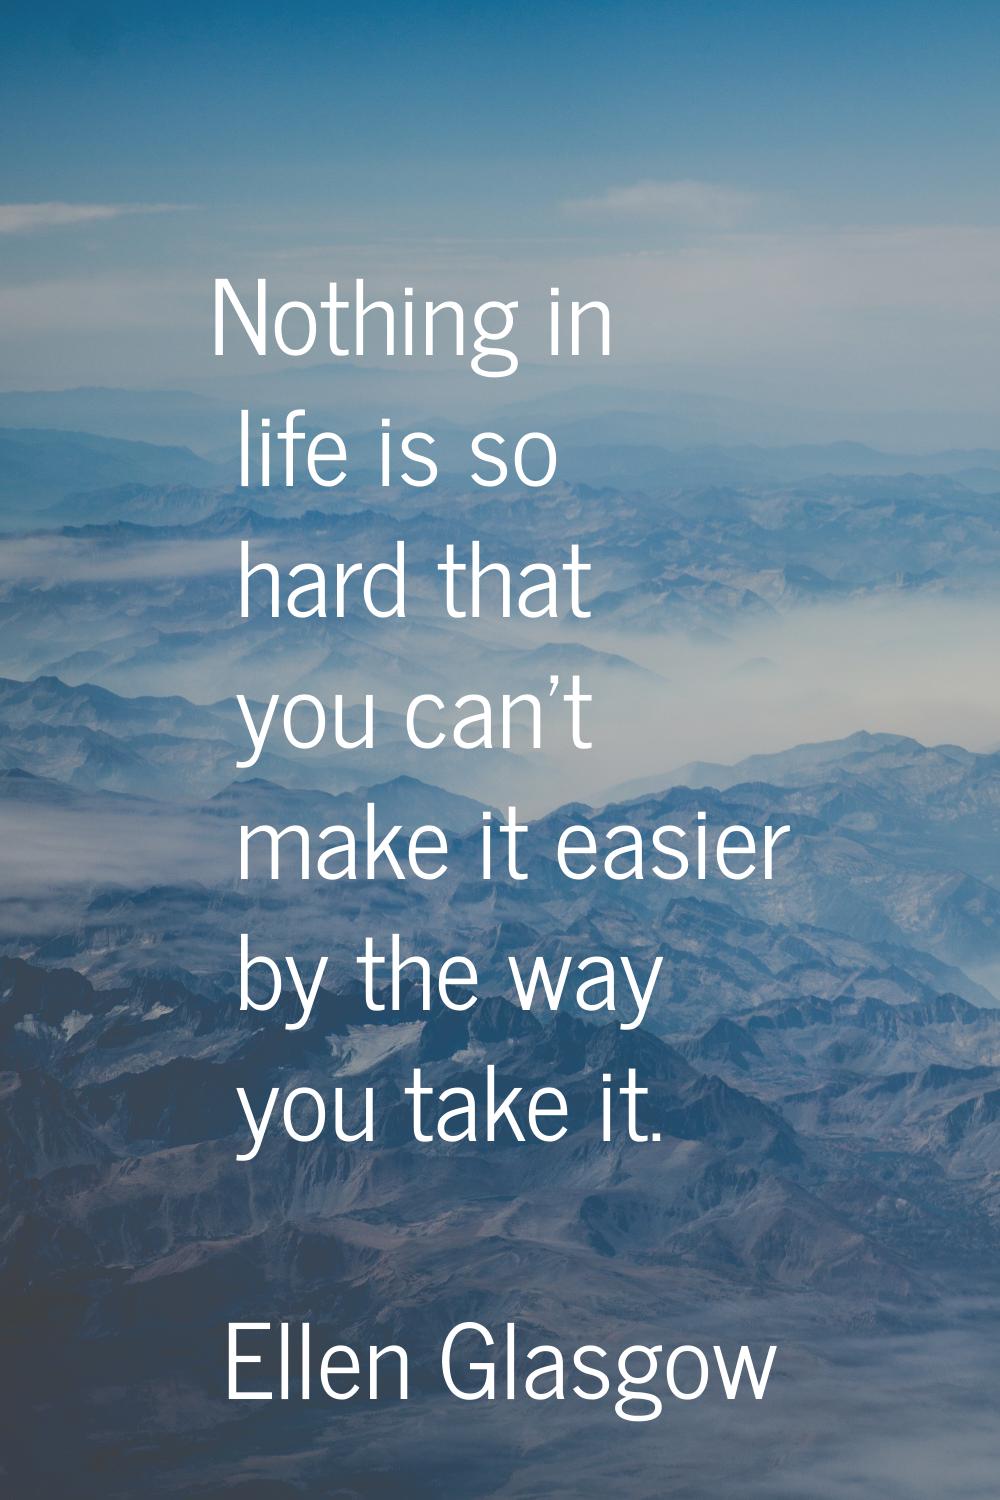 Nothing in life is so hard that you can't make it easier by the way you take it.